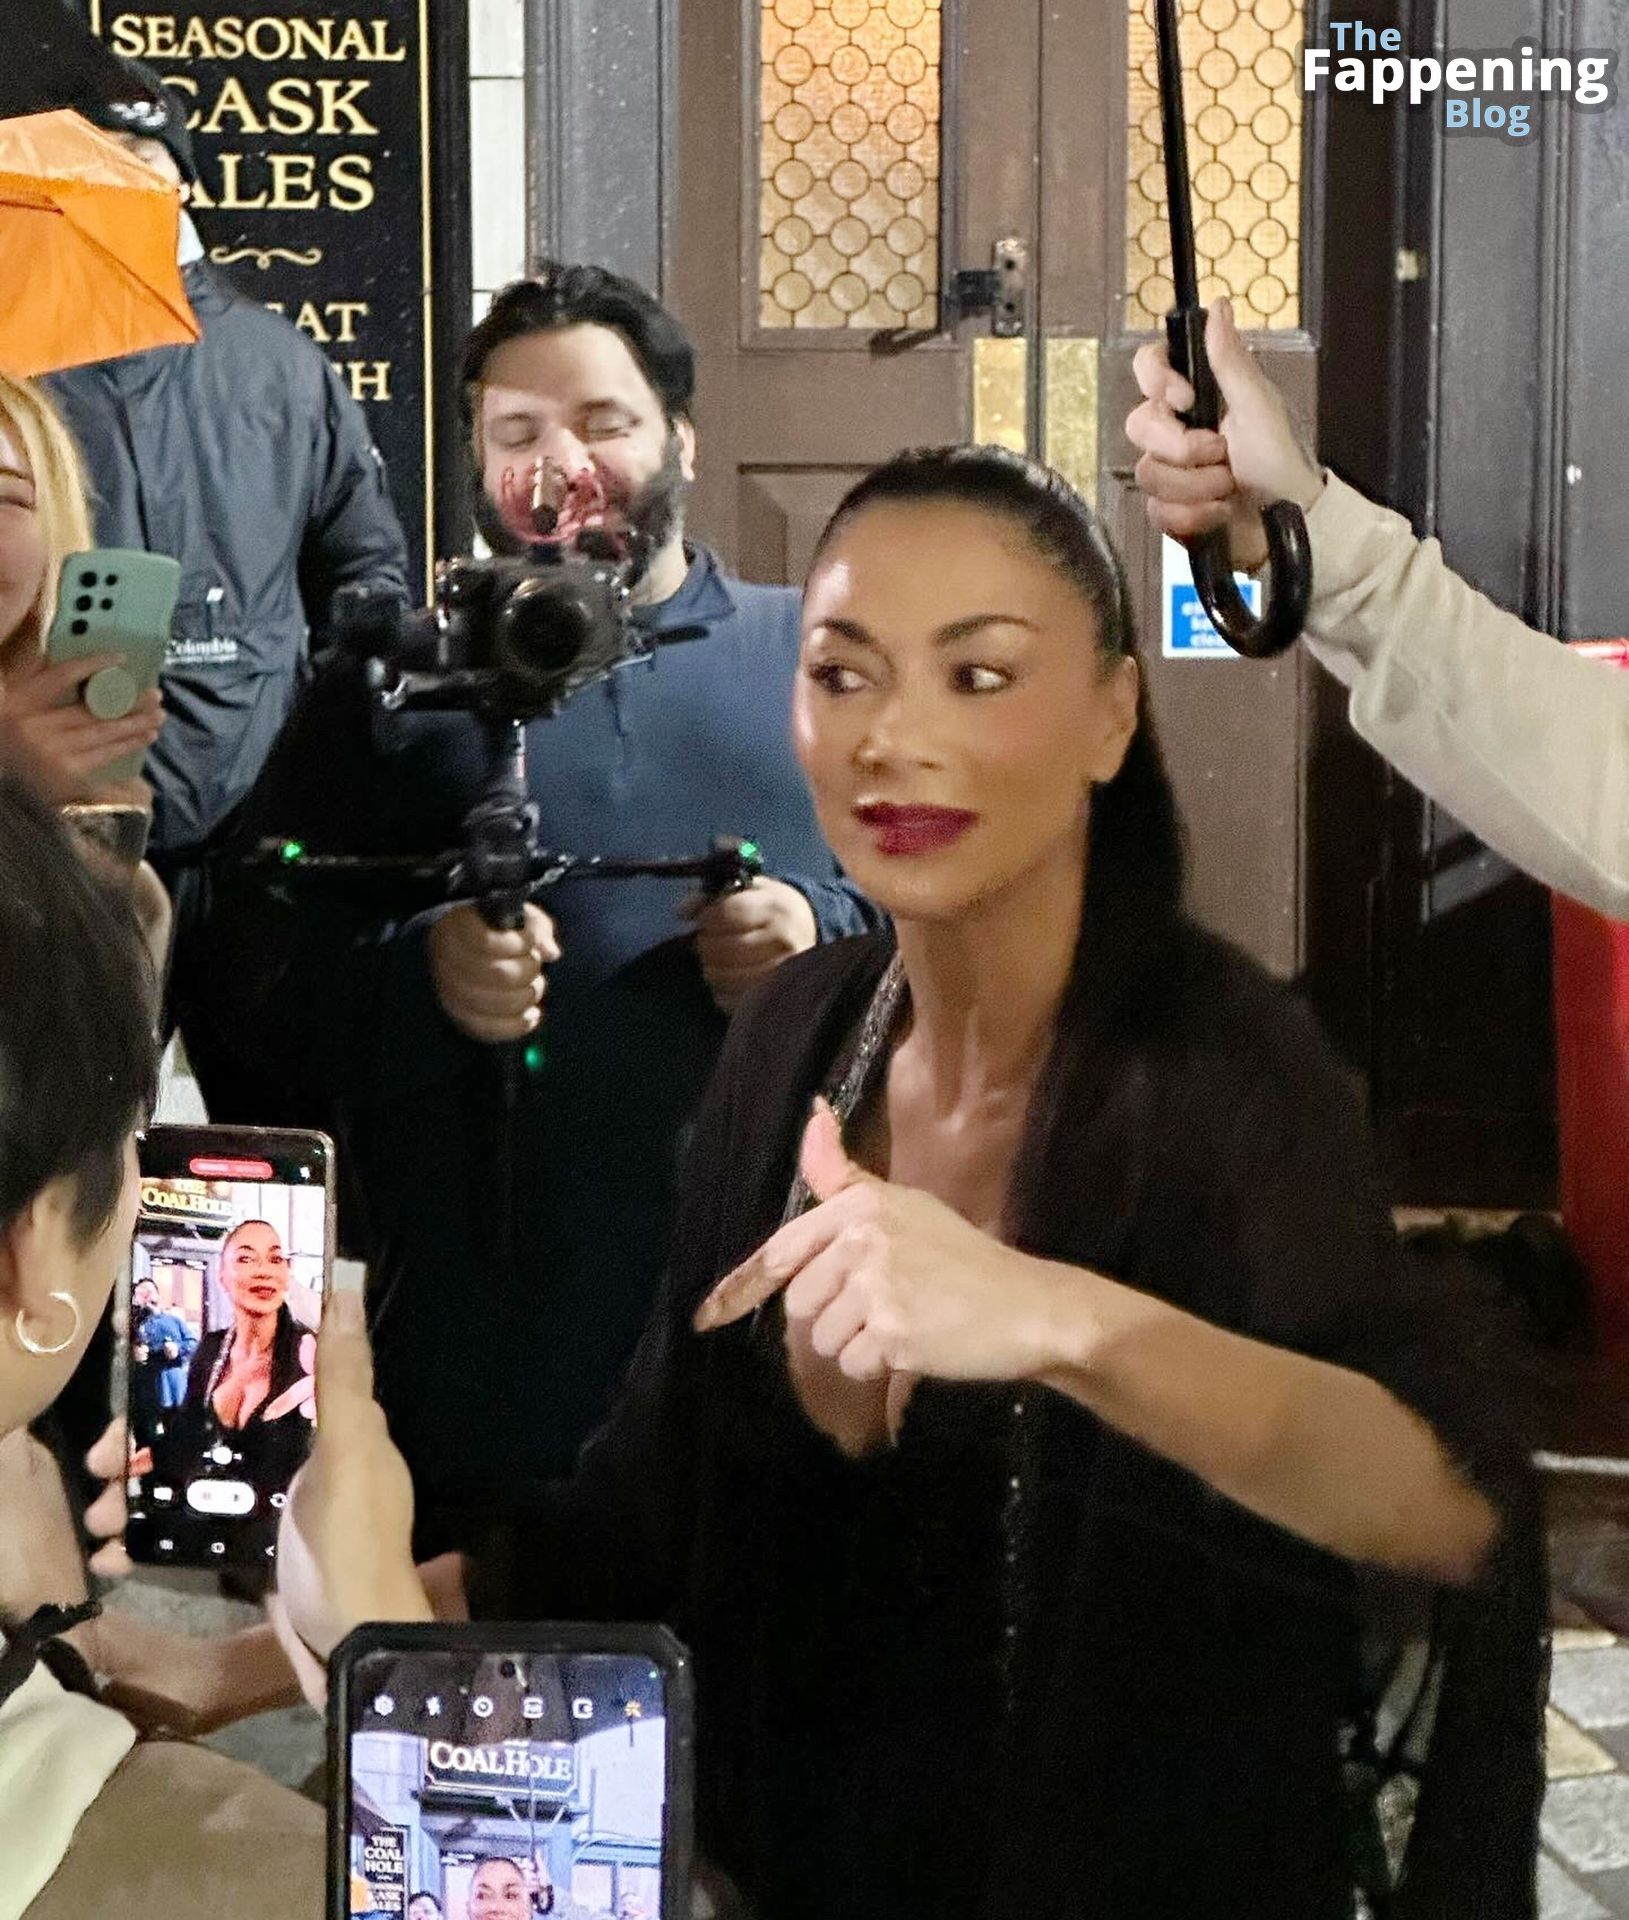 Nicole Scherzinger Looks in Great Spirits While Meeting Fans Outside the Savoy Theatre (14 Photos)